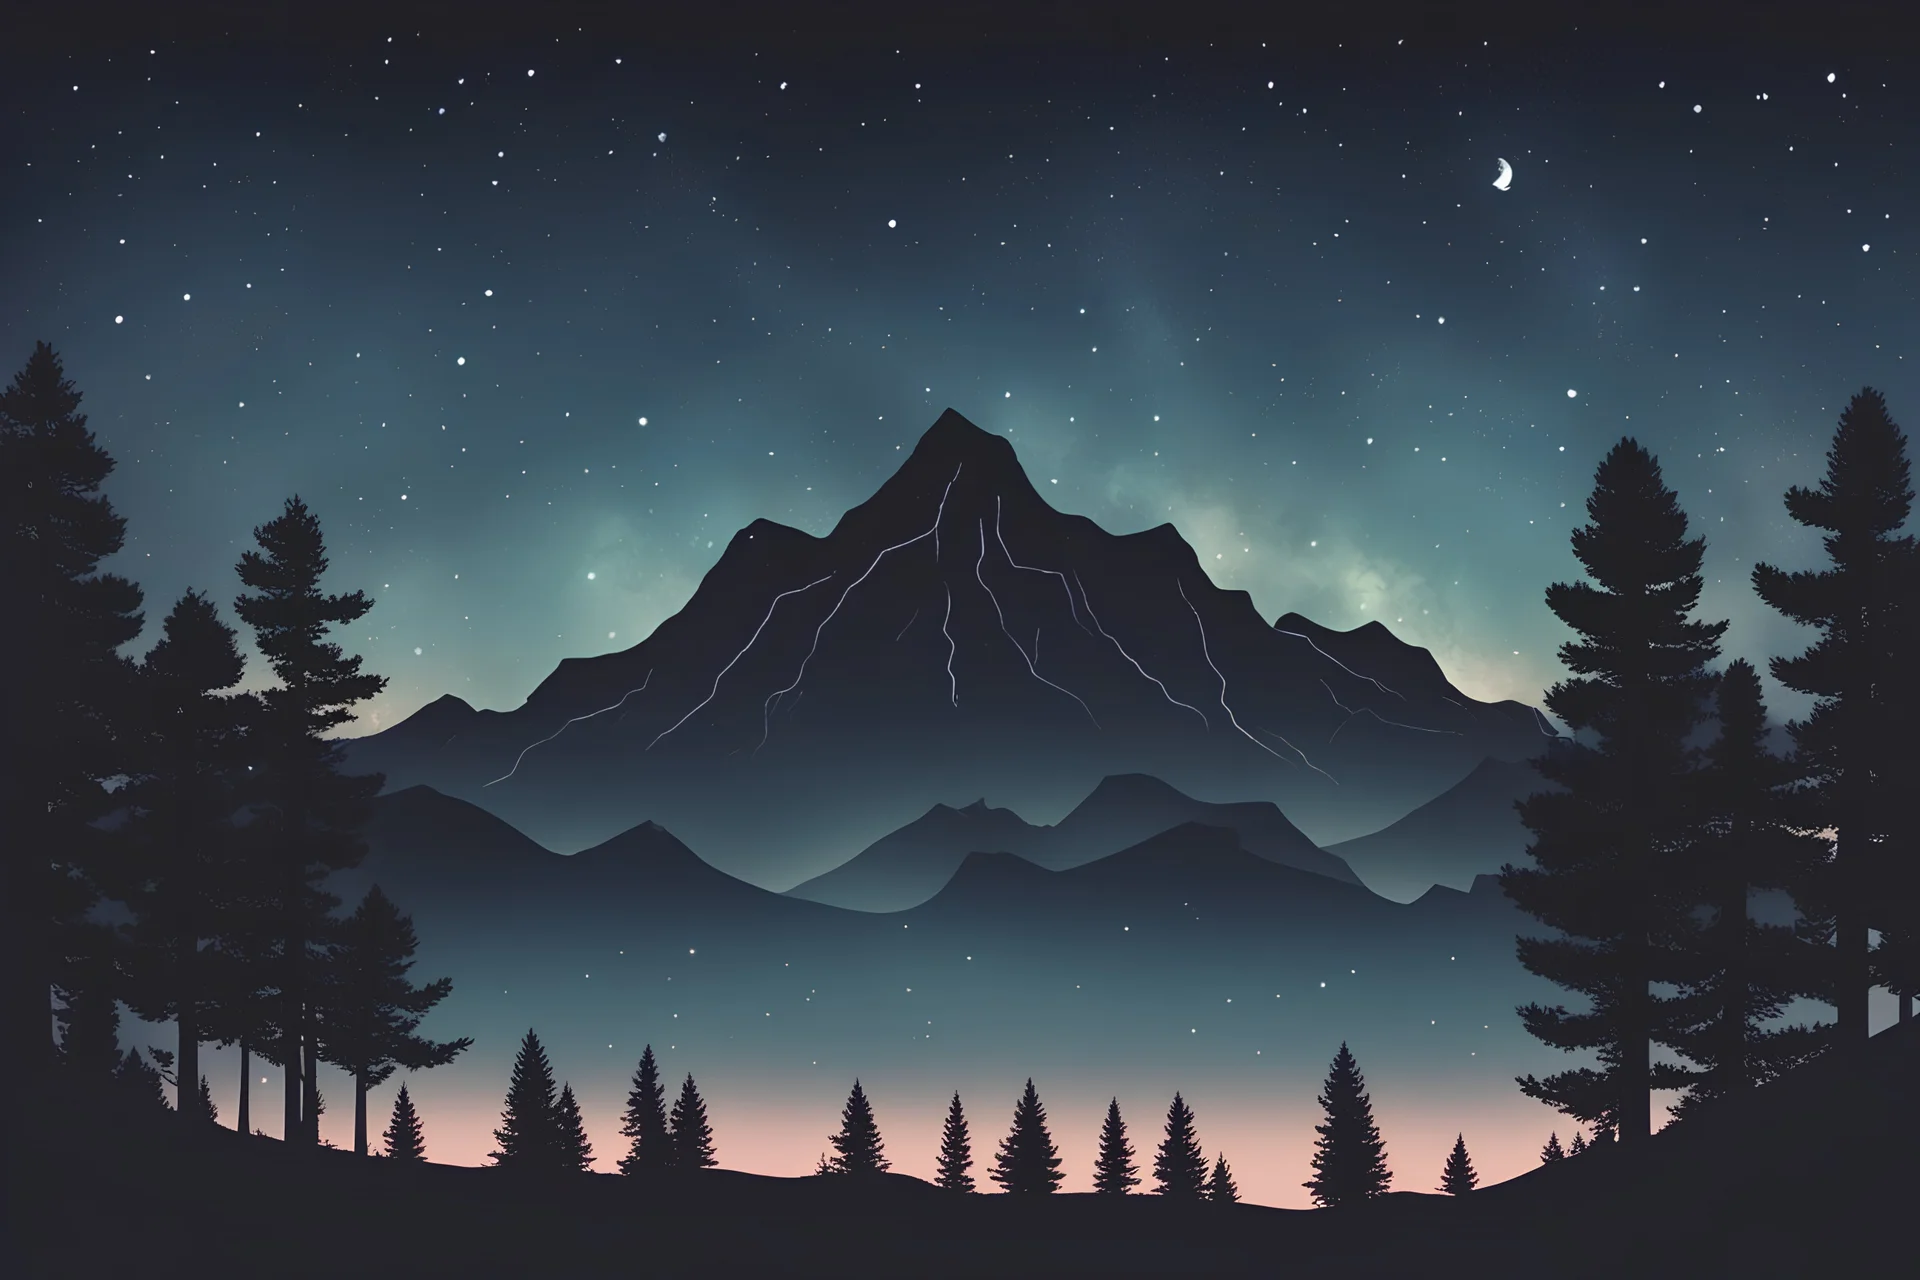 A calming night sky with silhouettes of trees and mountains, featuring a cassette tape floating among the stars, playing lo-fi beats.